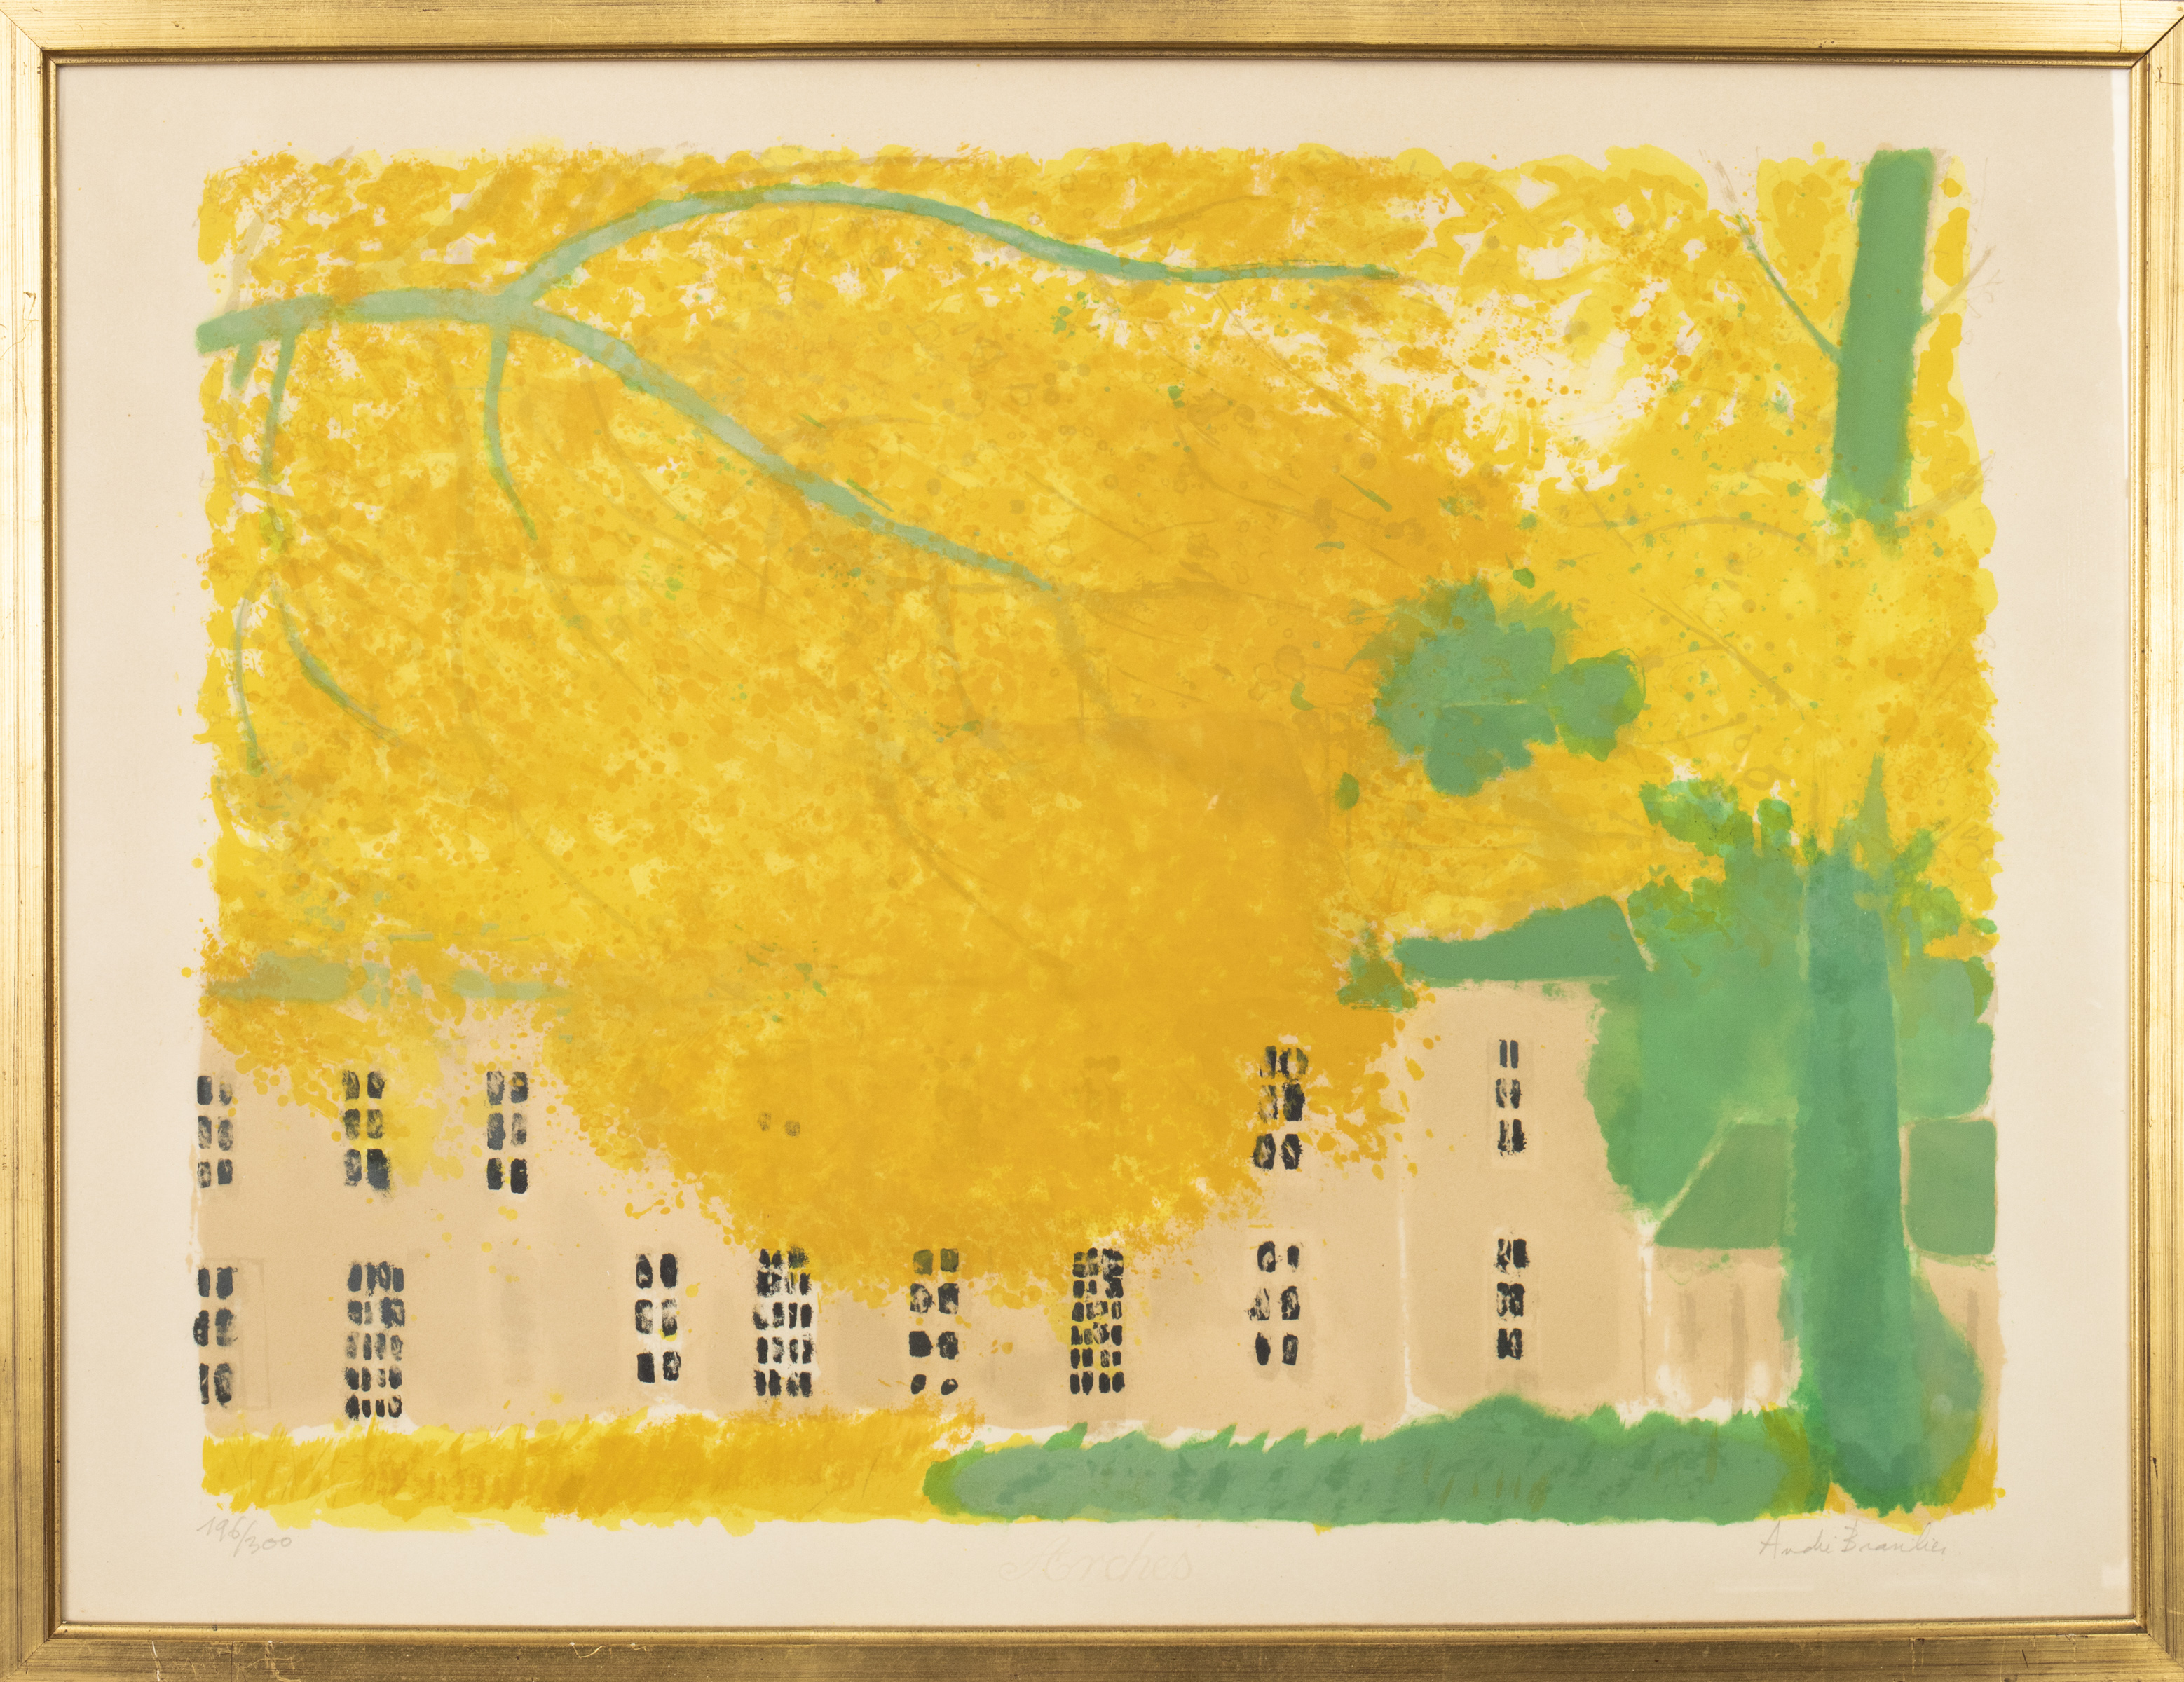 ANDRE BRASILIER "YELLOW TREE" LITHOGRAPH